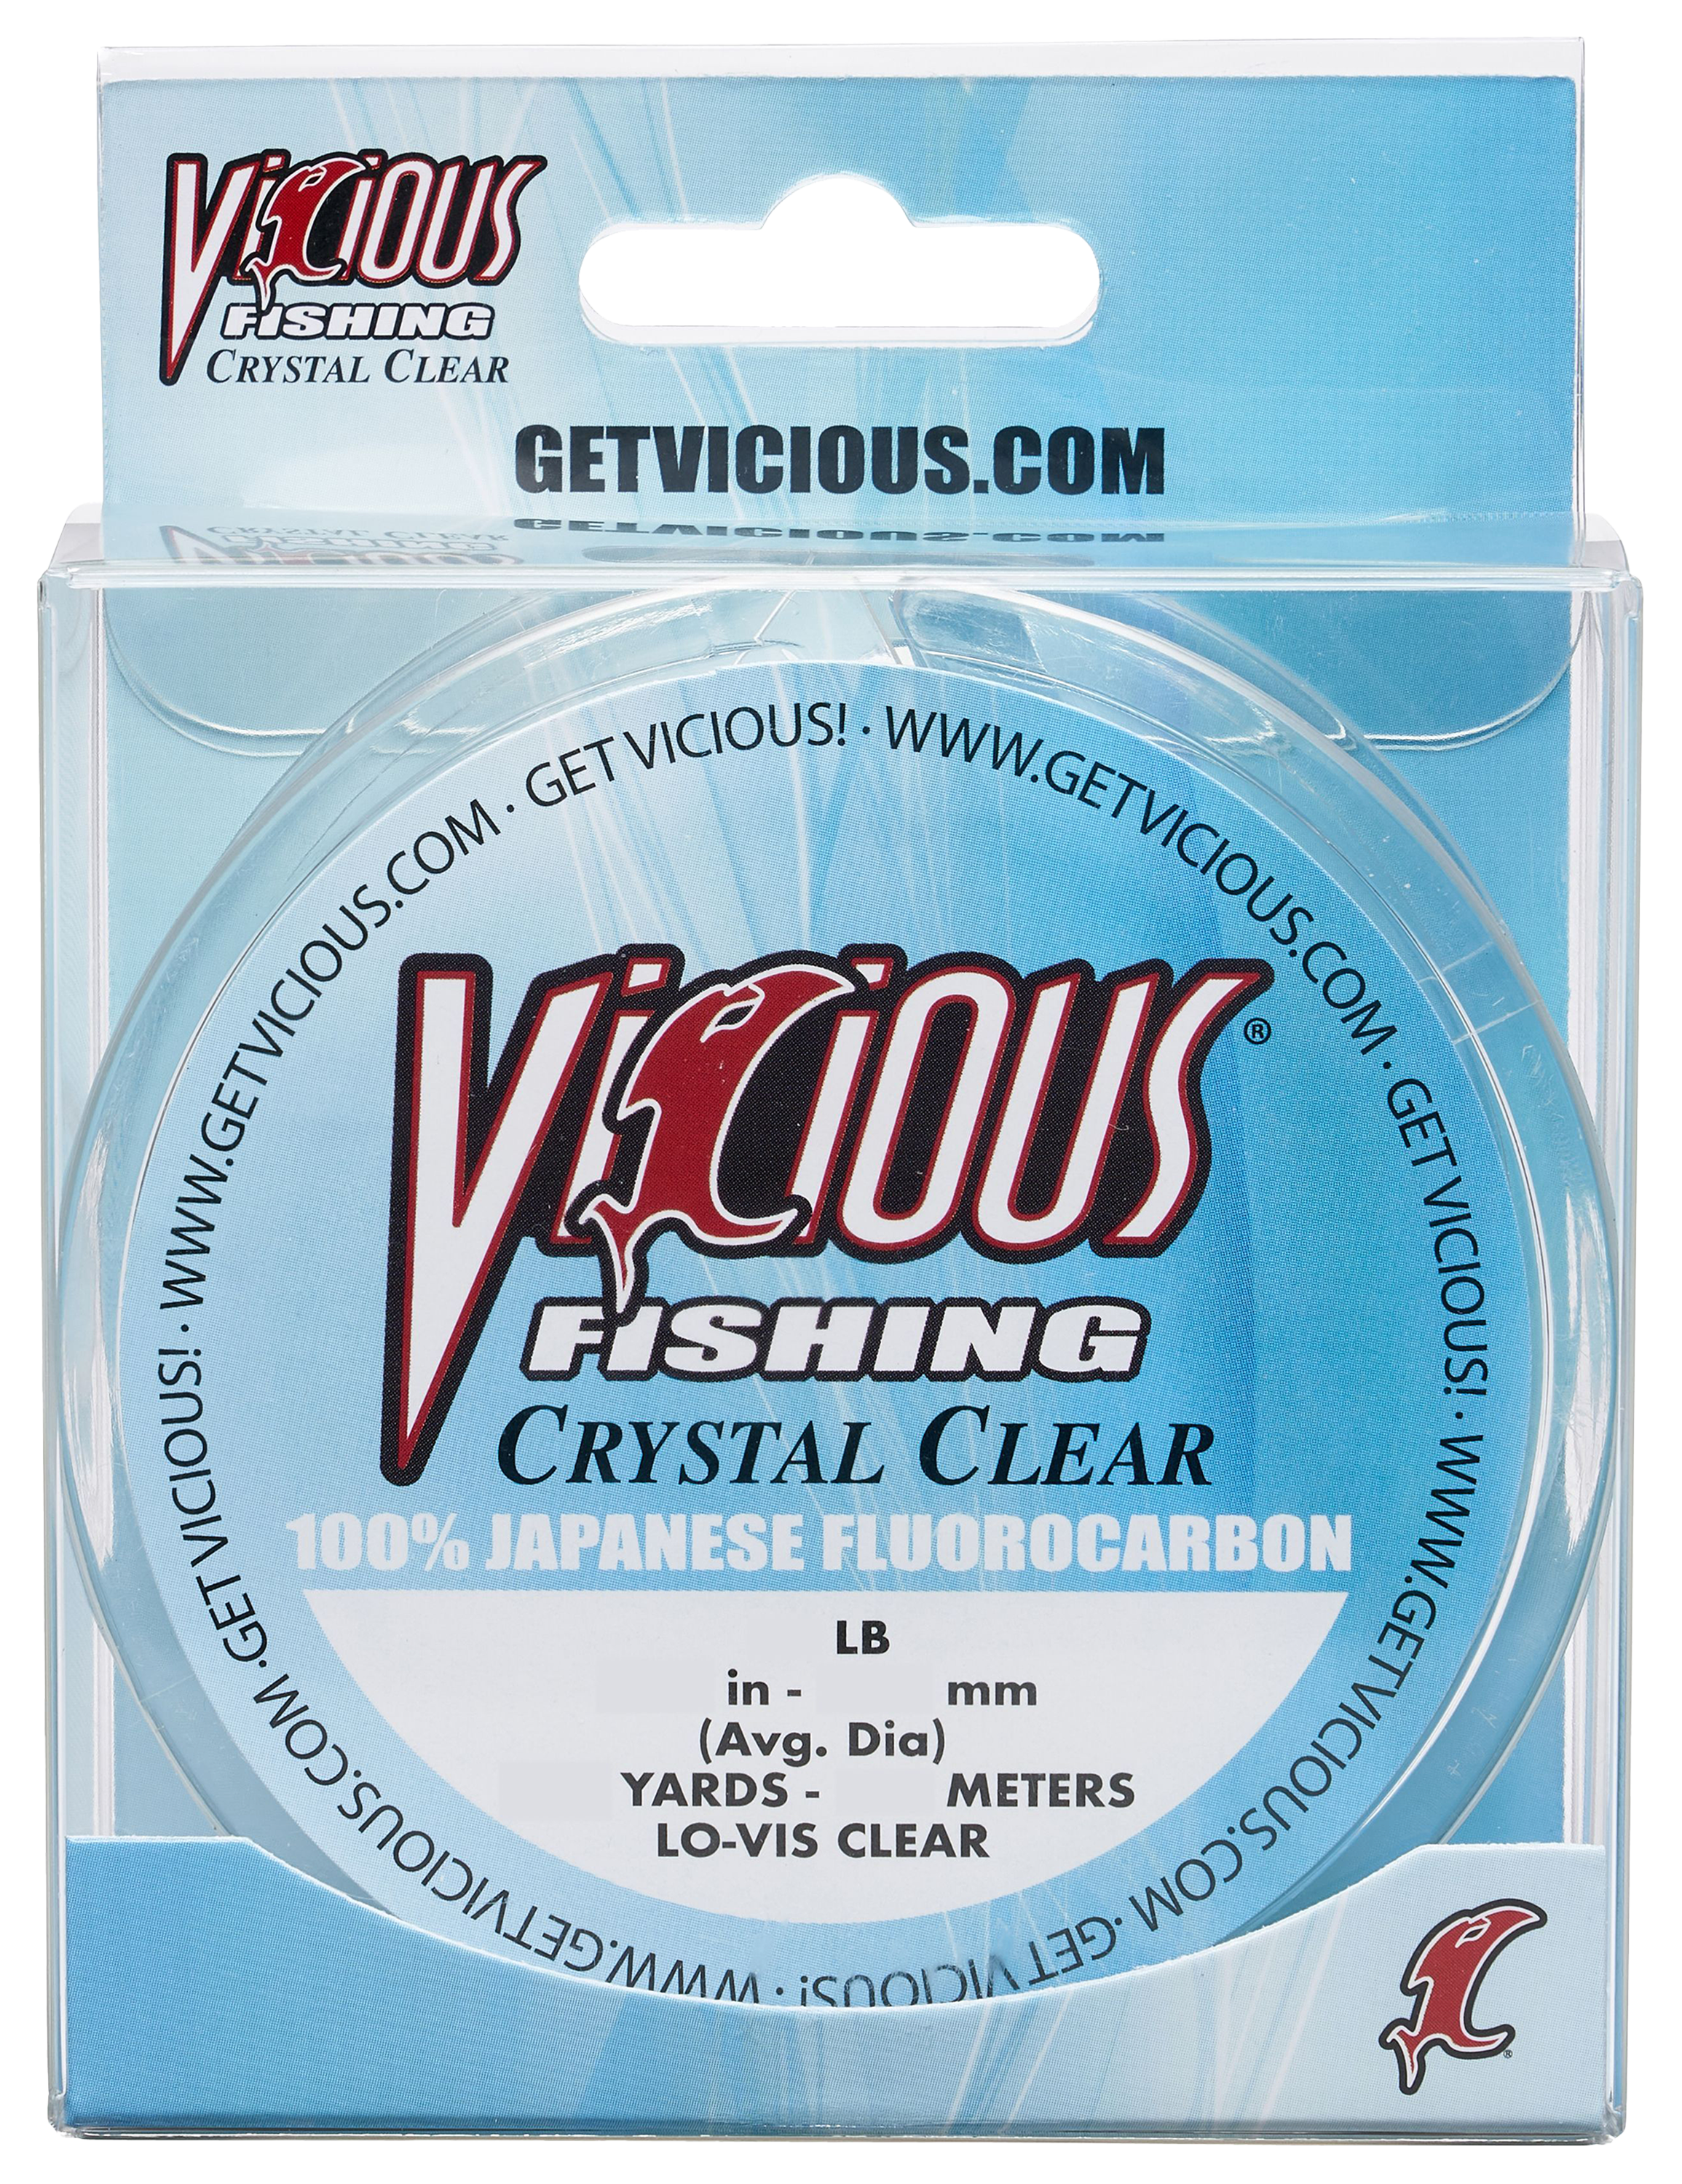 Vicious Fishing Crystal Clear 100% Japanese Fluorocarbon Fishing Line - 200 Yards - 18 lb.